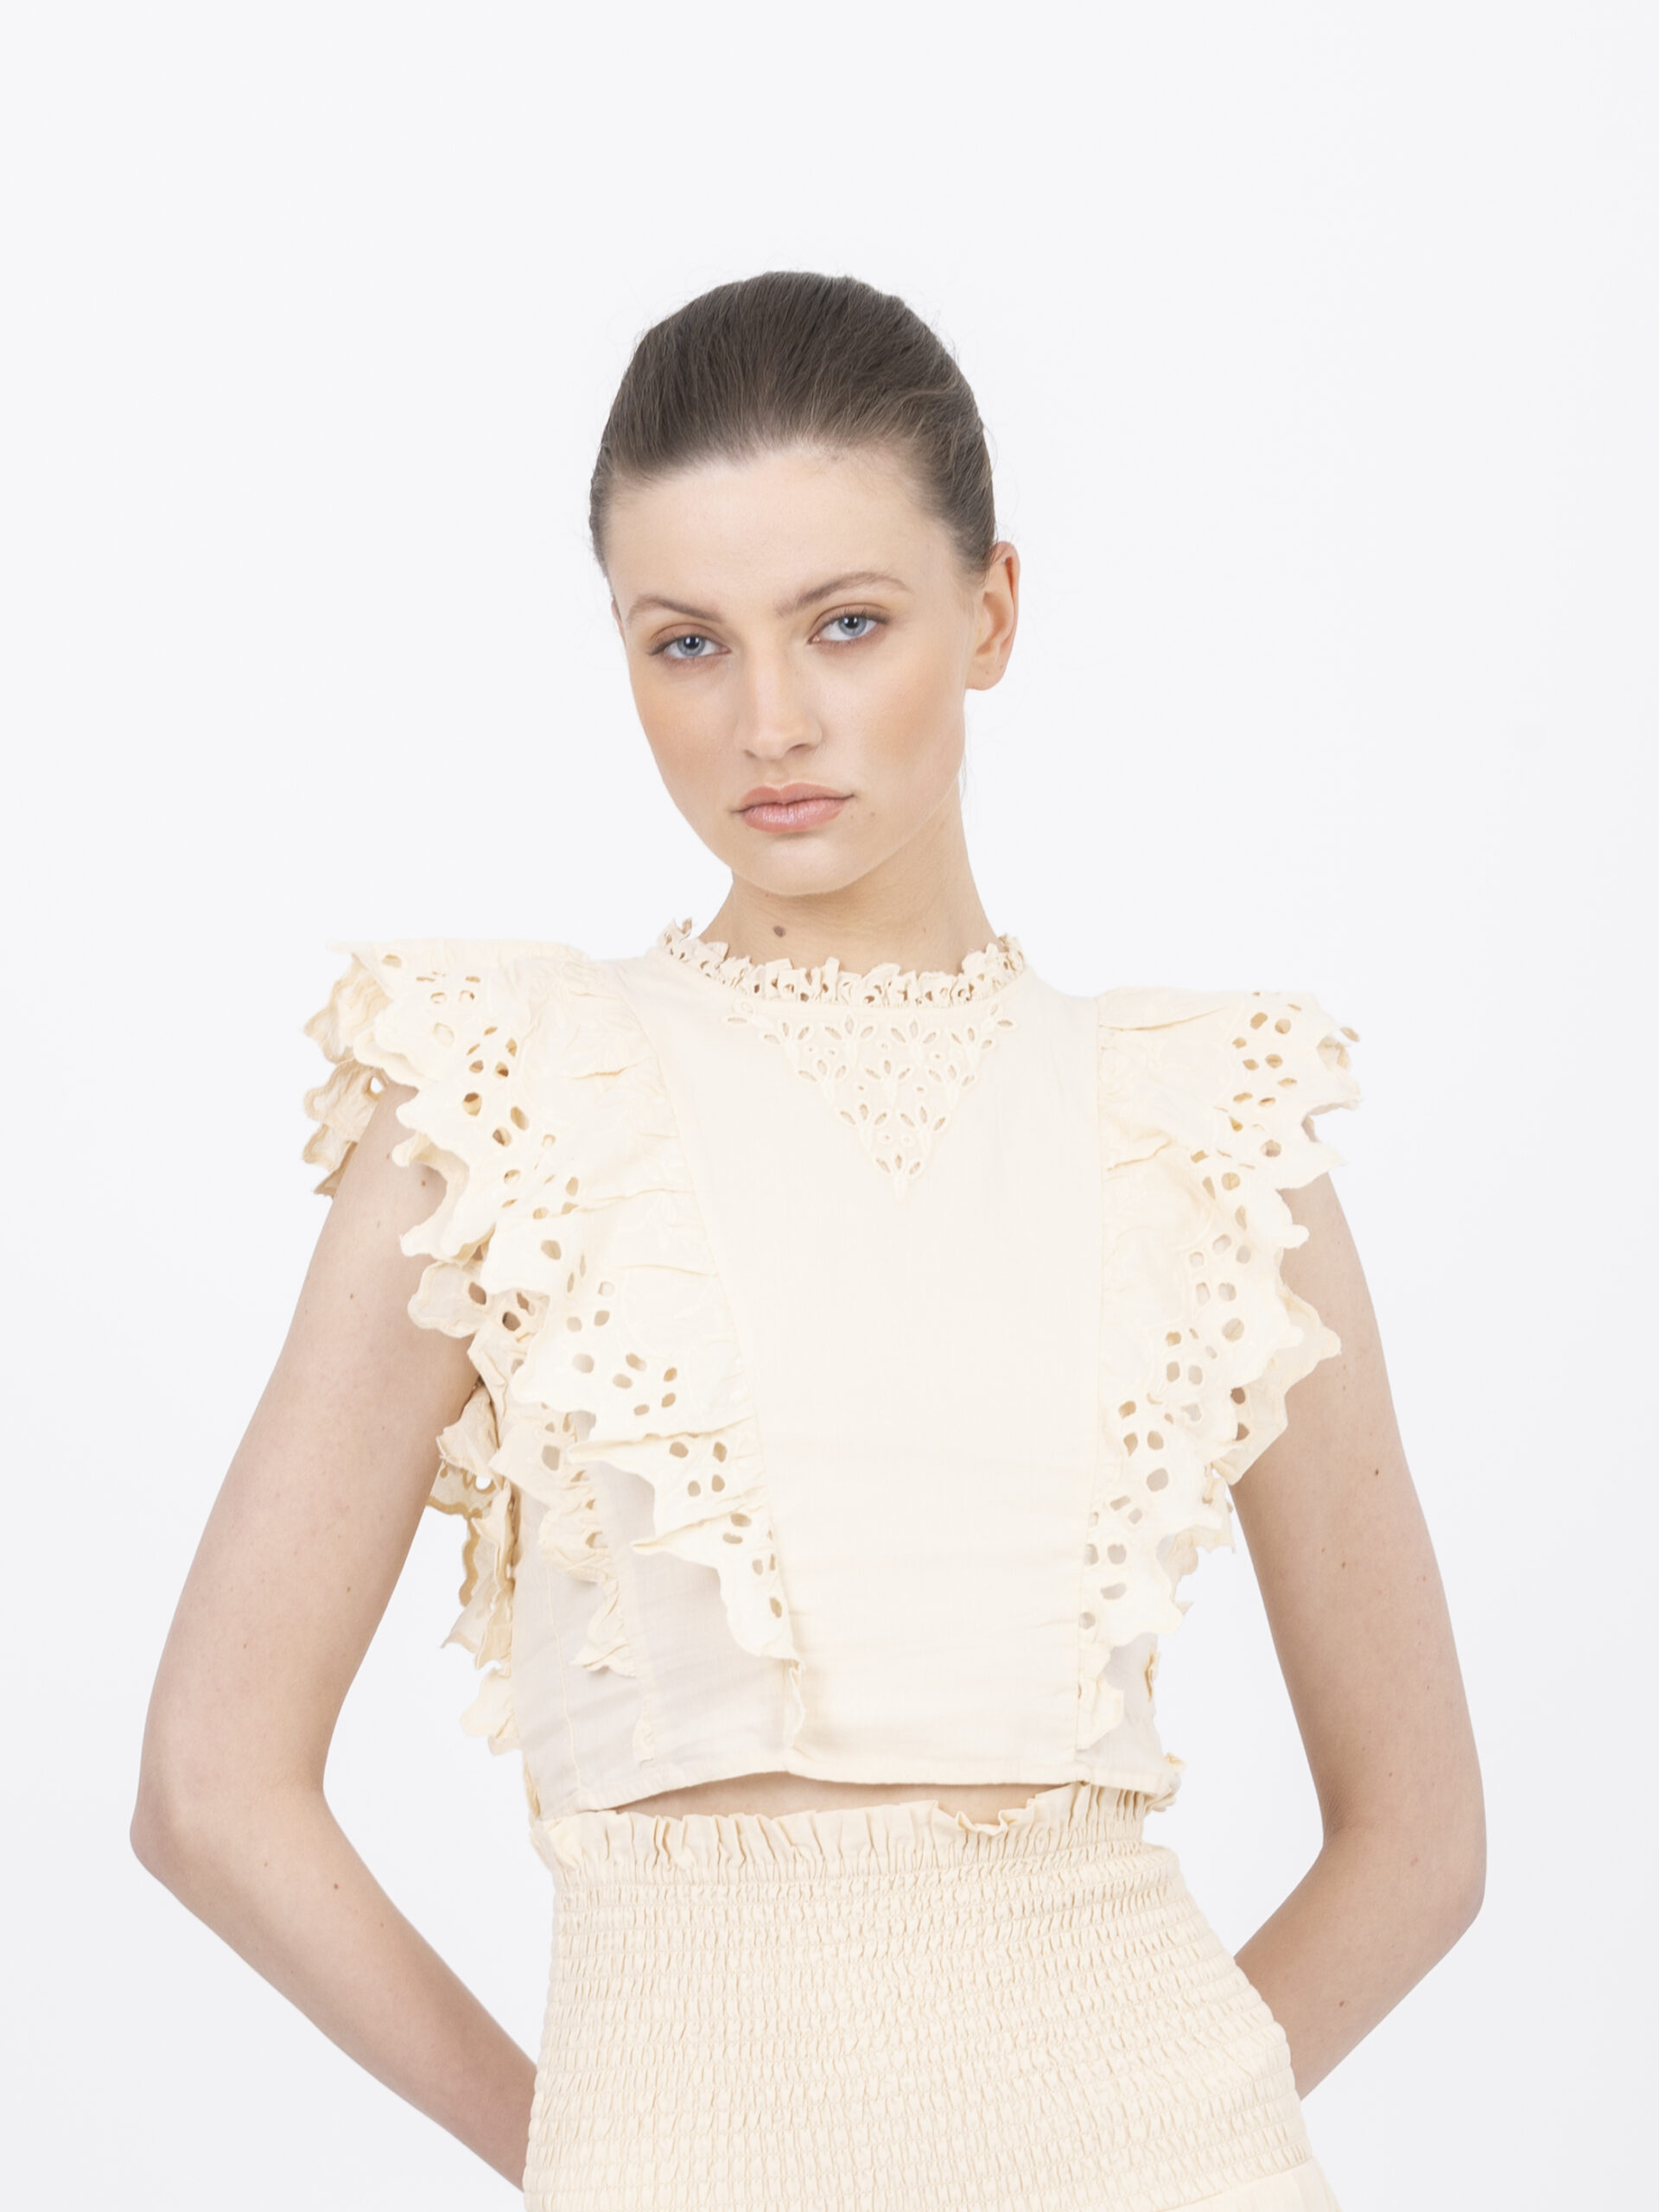 tripoli-embroidered-ruffles-crop-top-cotton-berenice-smocked-matchbxoathens